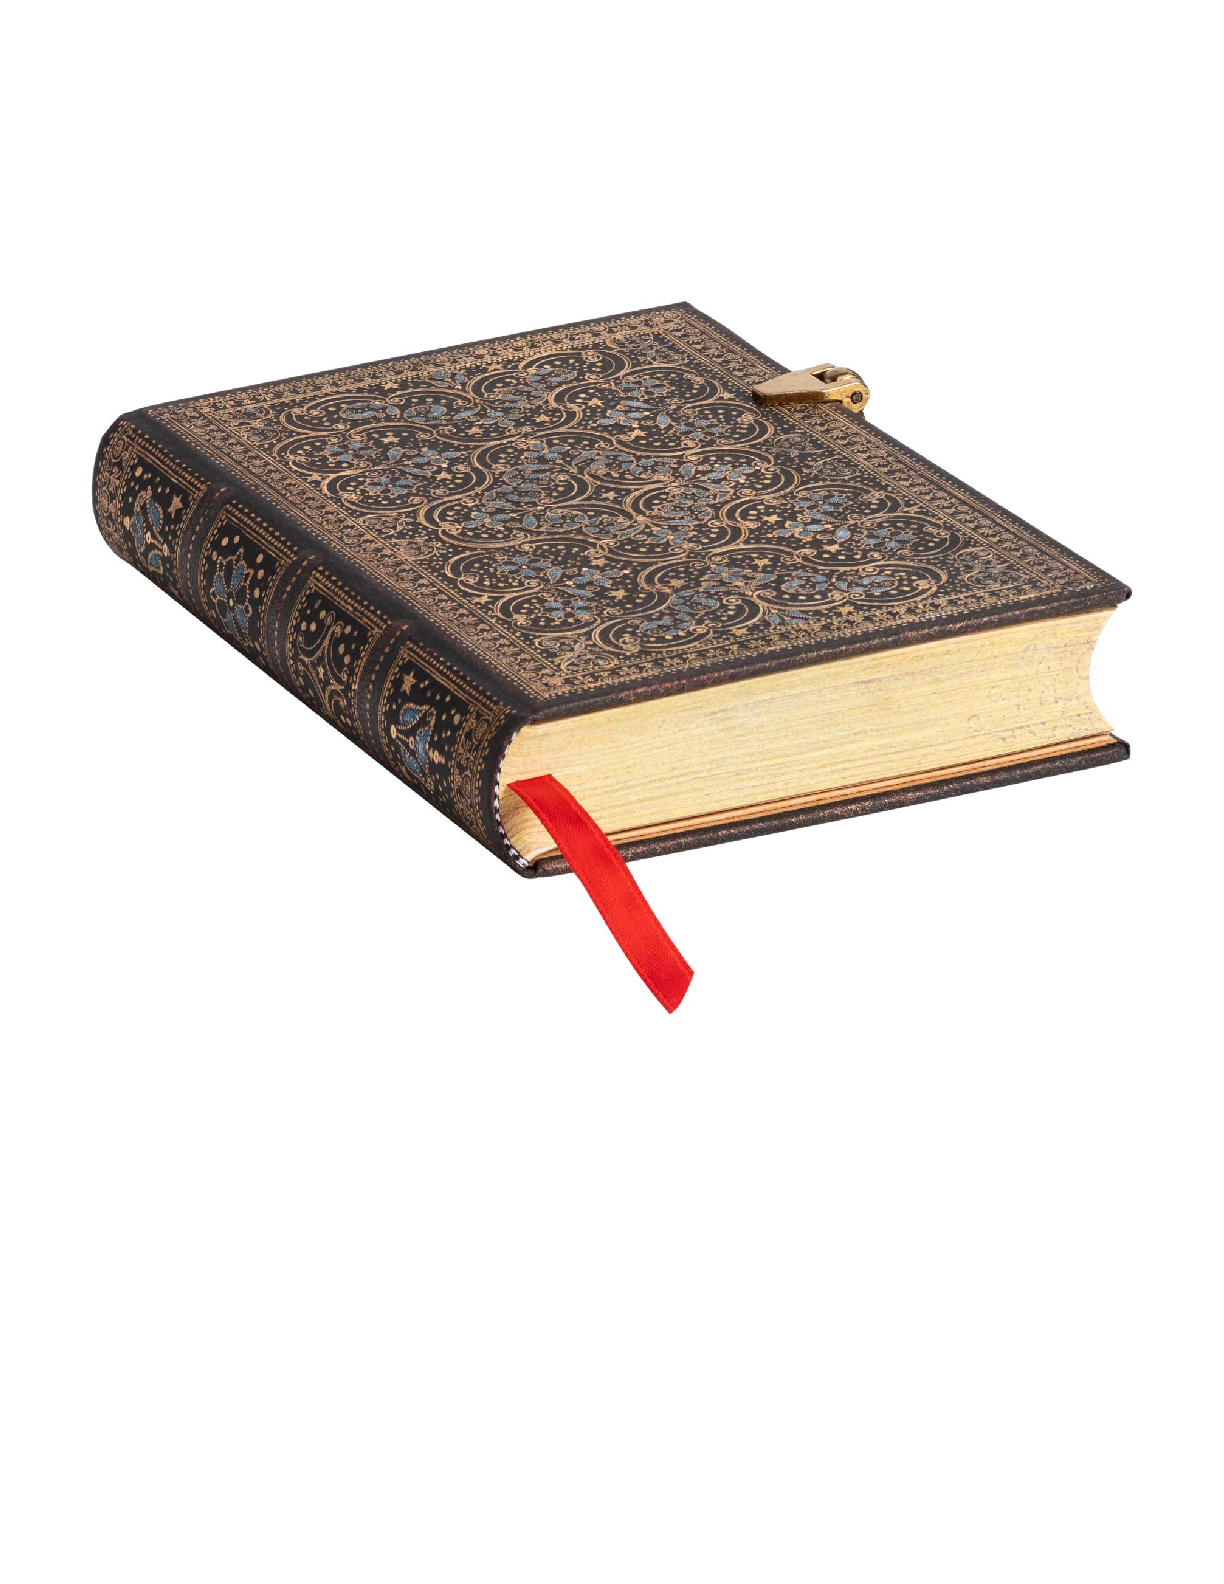 Restoration, The Queen's Binding, Hardcover, Mini, Lined, Clasp Closure, 240 Pg, 120 GSM